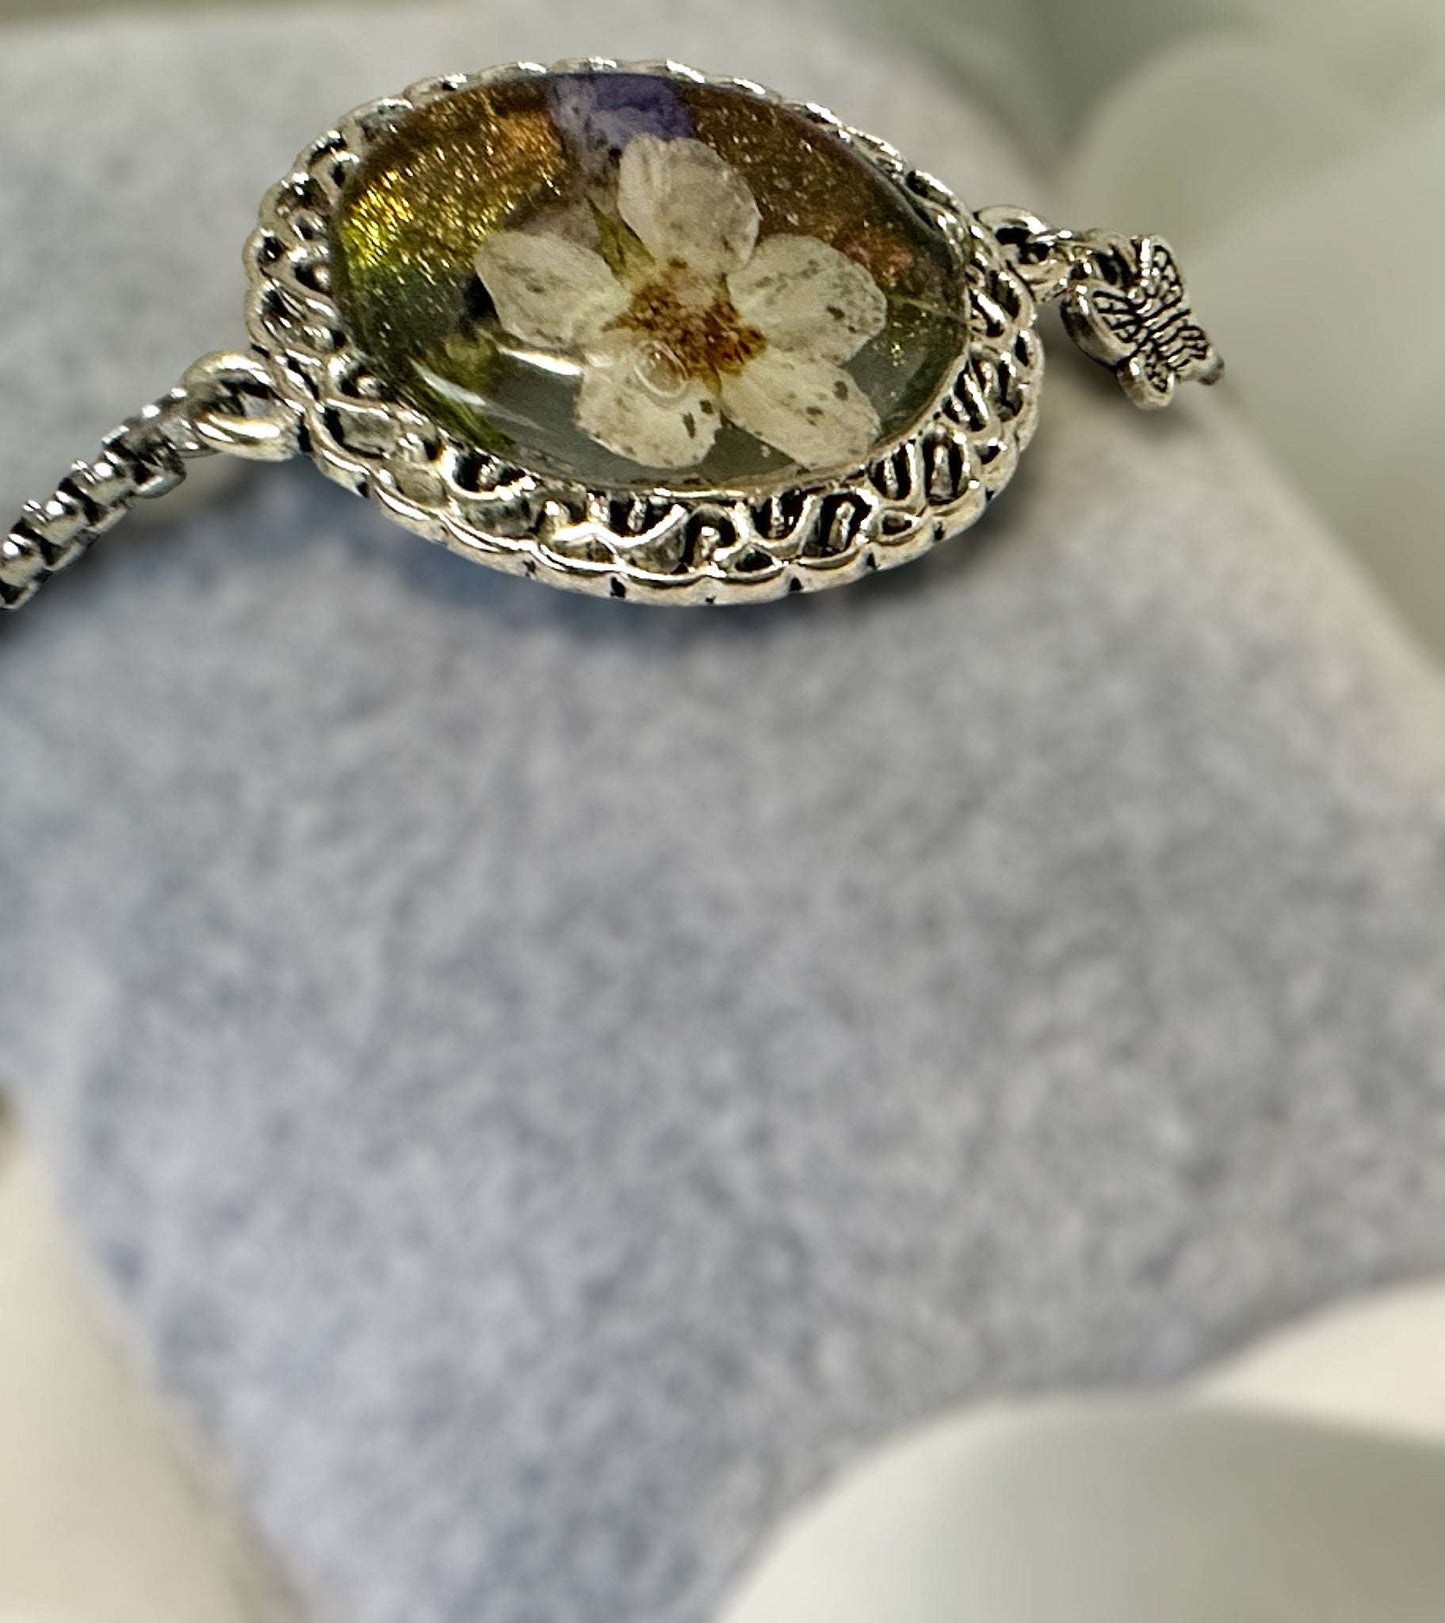 Bracelet Handmade with Dried Flower Accents & Silver Elegance 